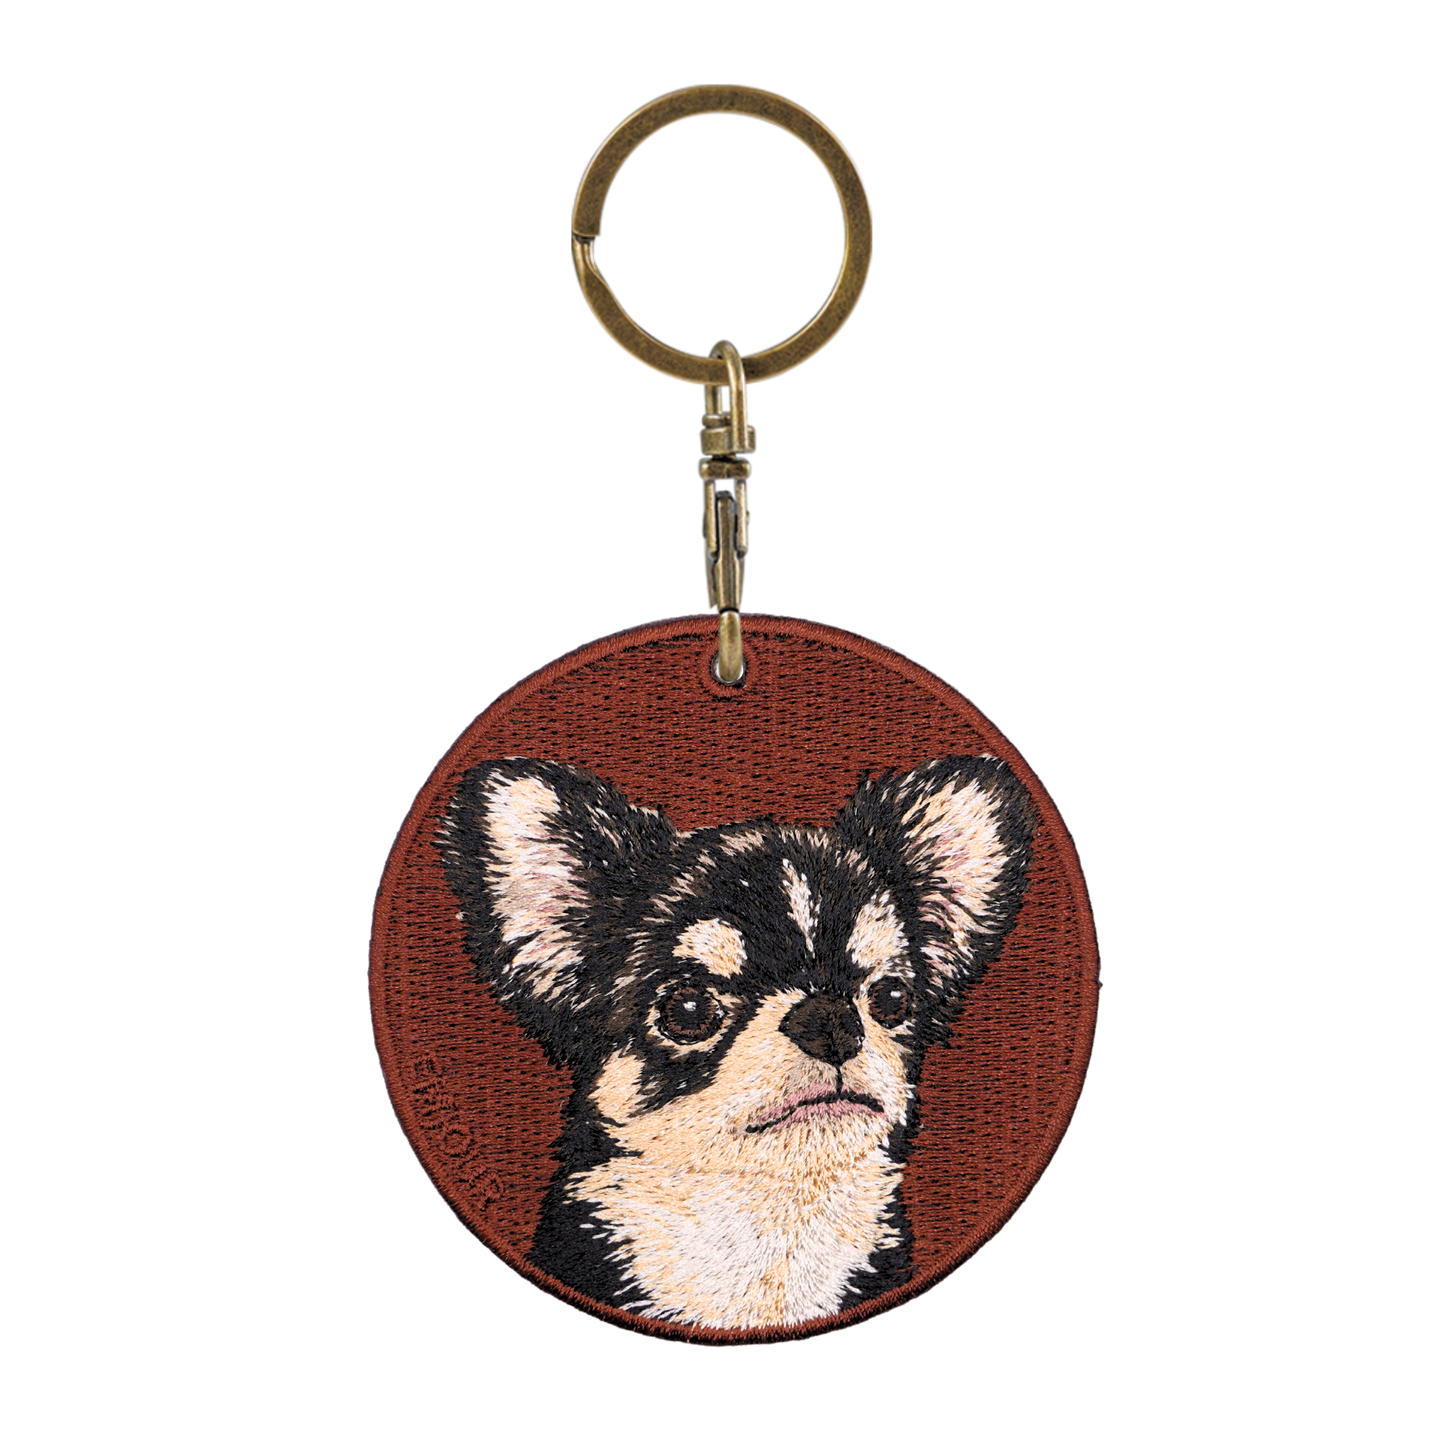 Double-Sided Embroidered Key Chain - Sanhua Mao